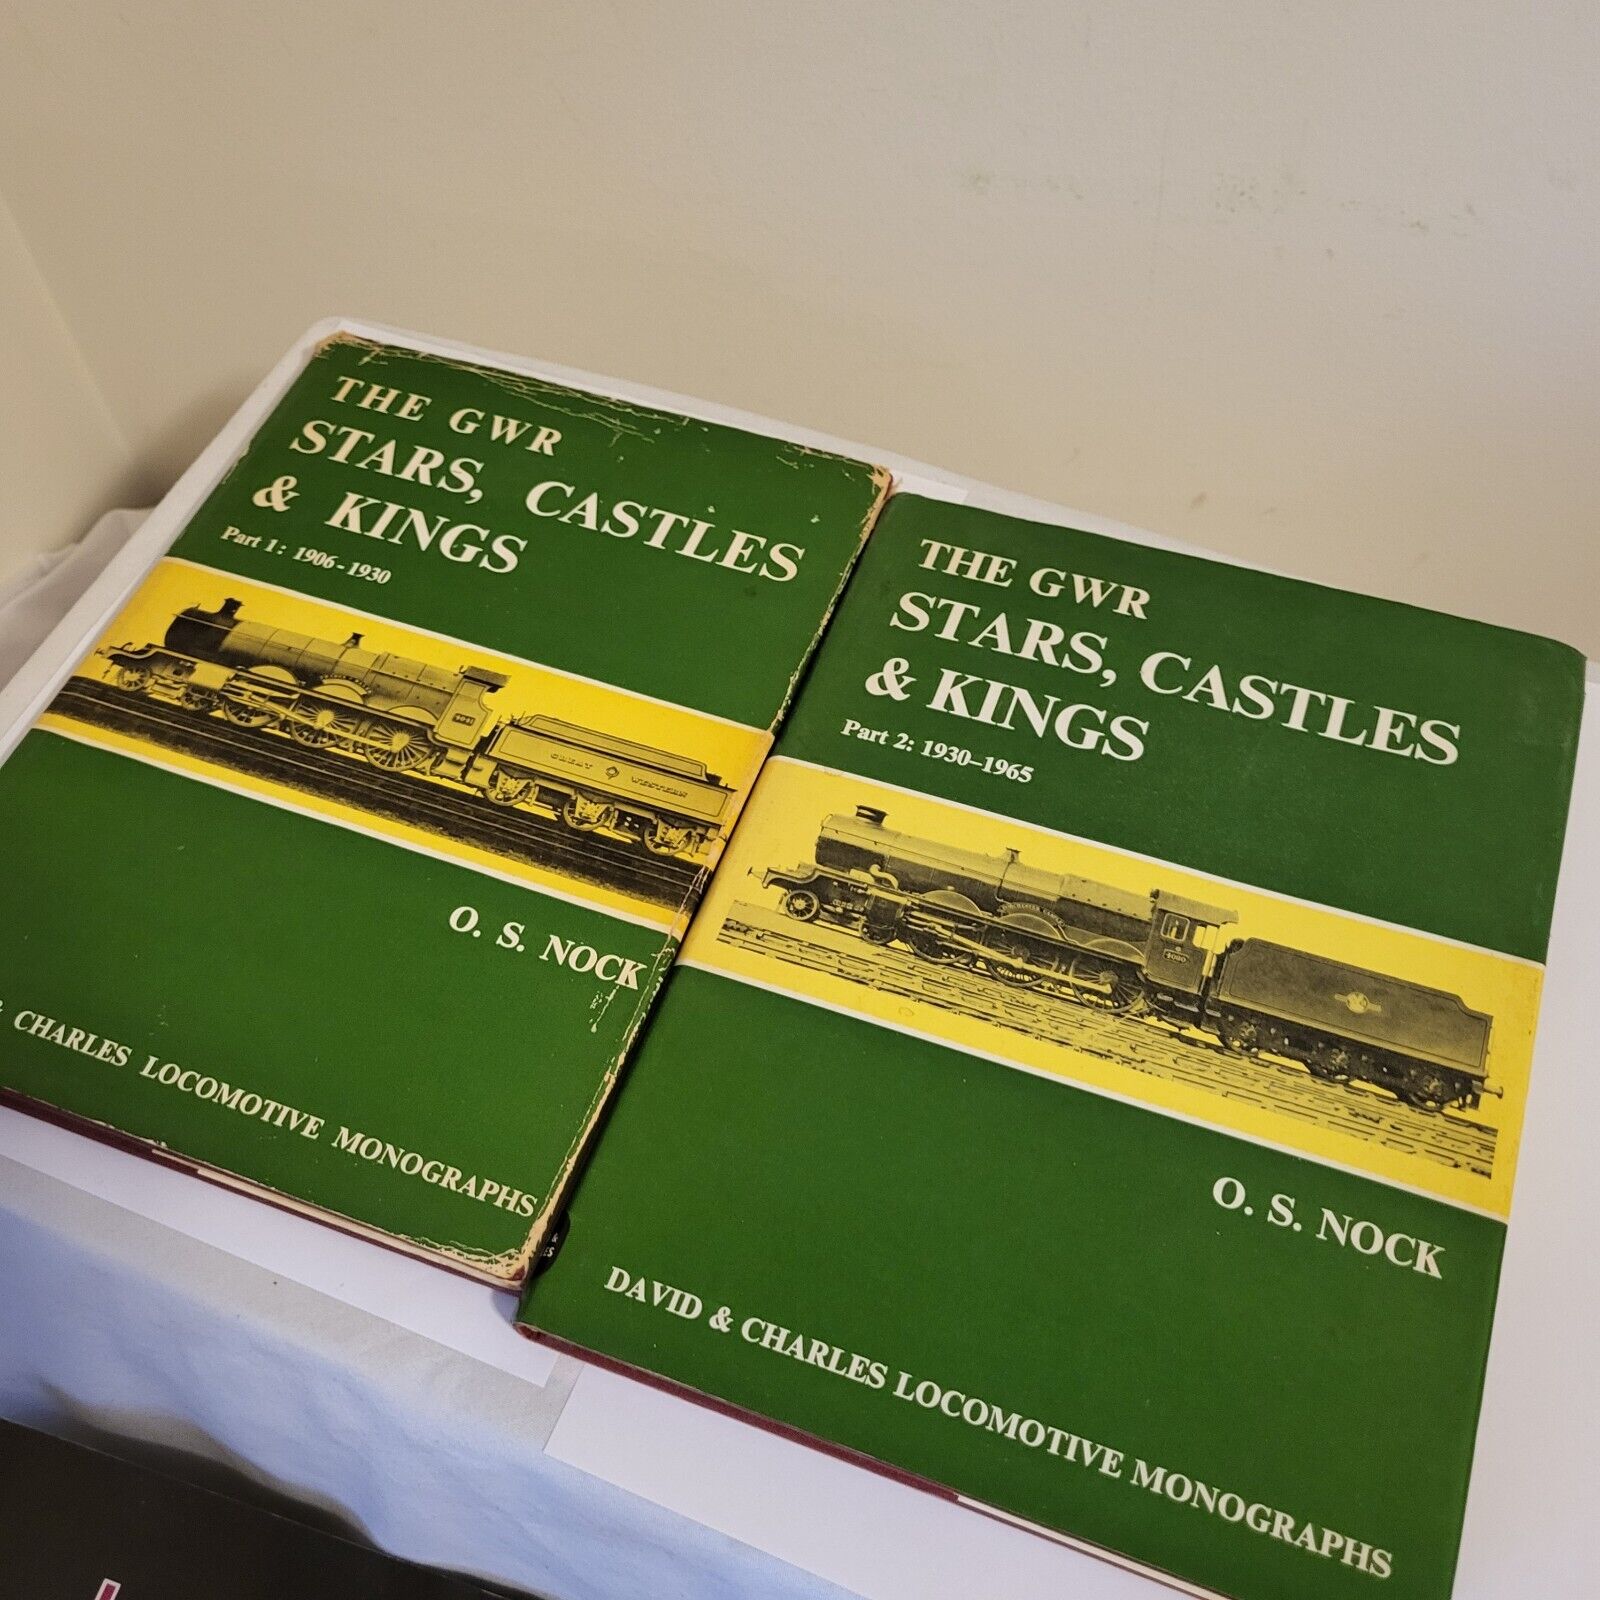 The GWR Stars, Castles & Kings. Parts 1 & 2. 1906 - 1965. O.S. Nock 1970 trains